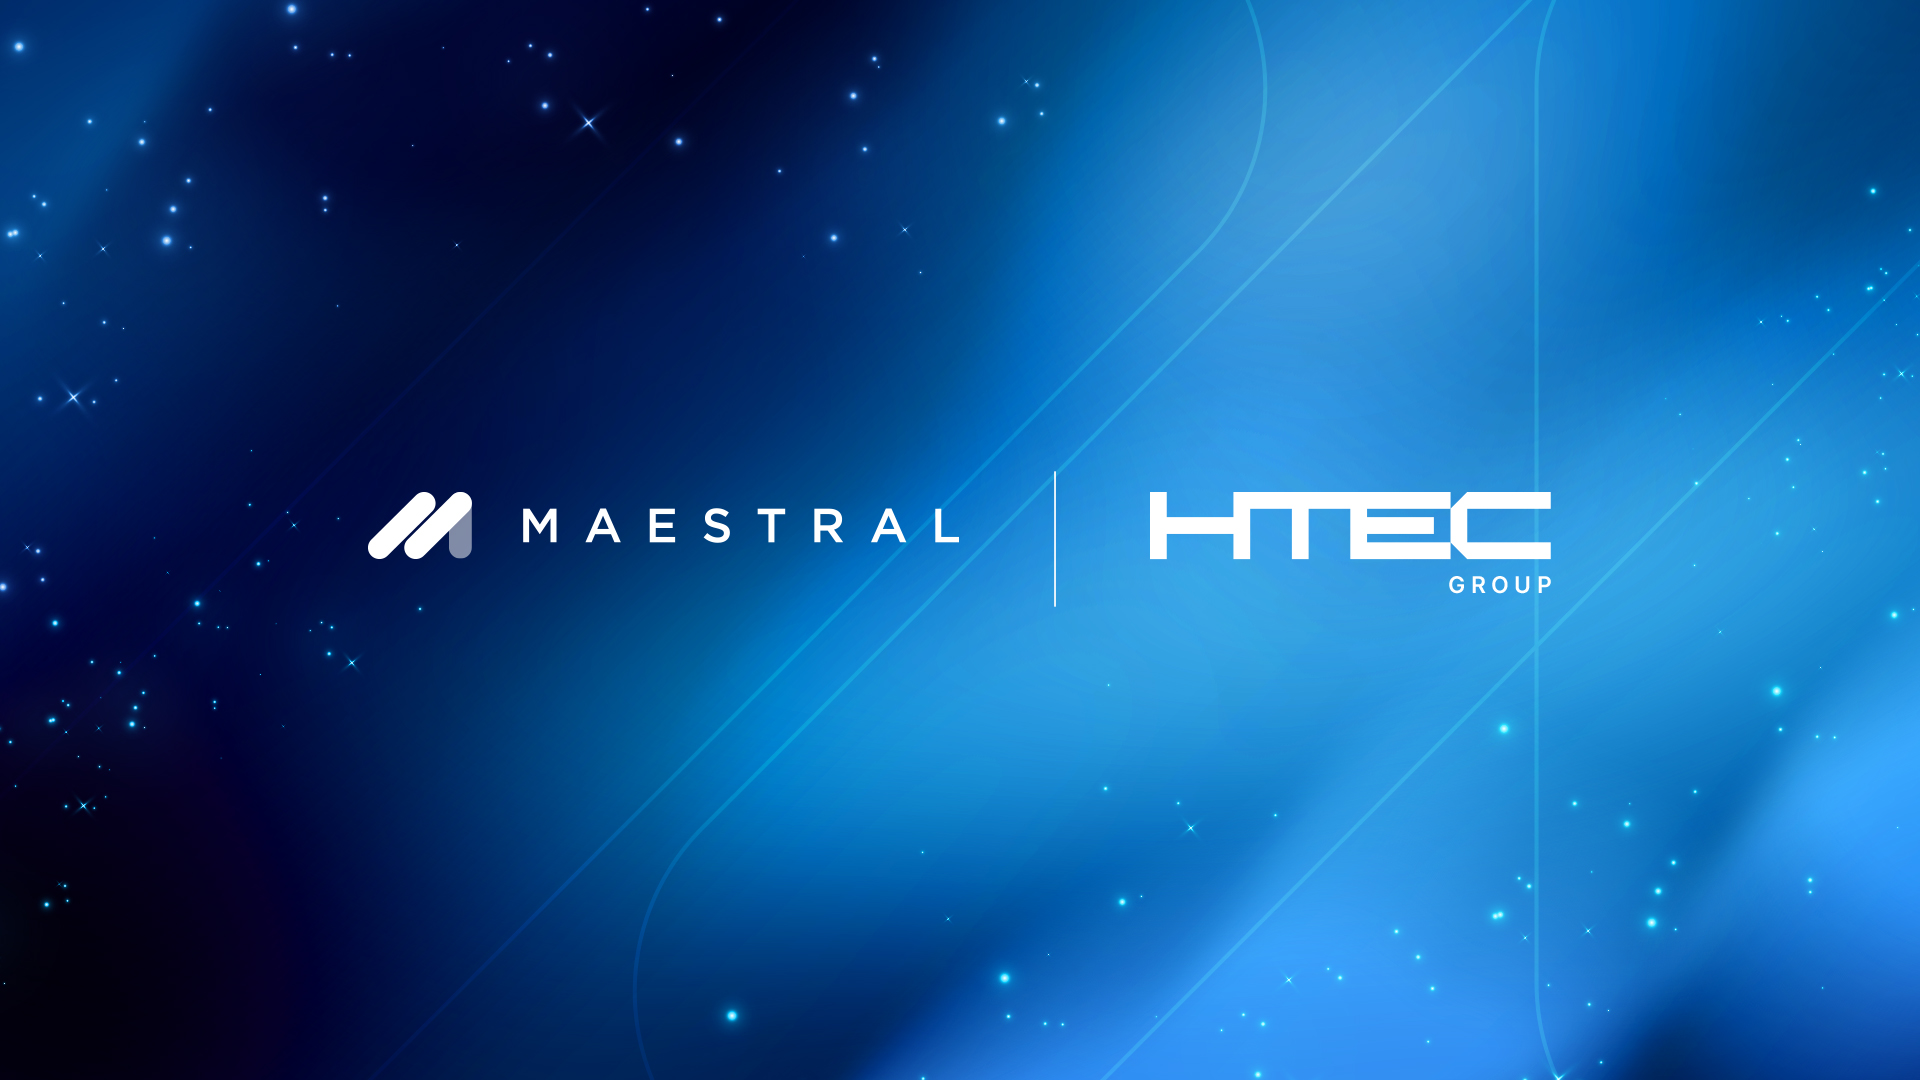 Maestral Solutions is now part of HTEC Group